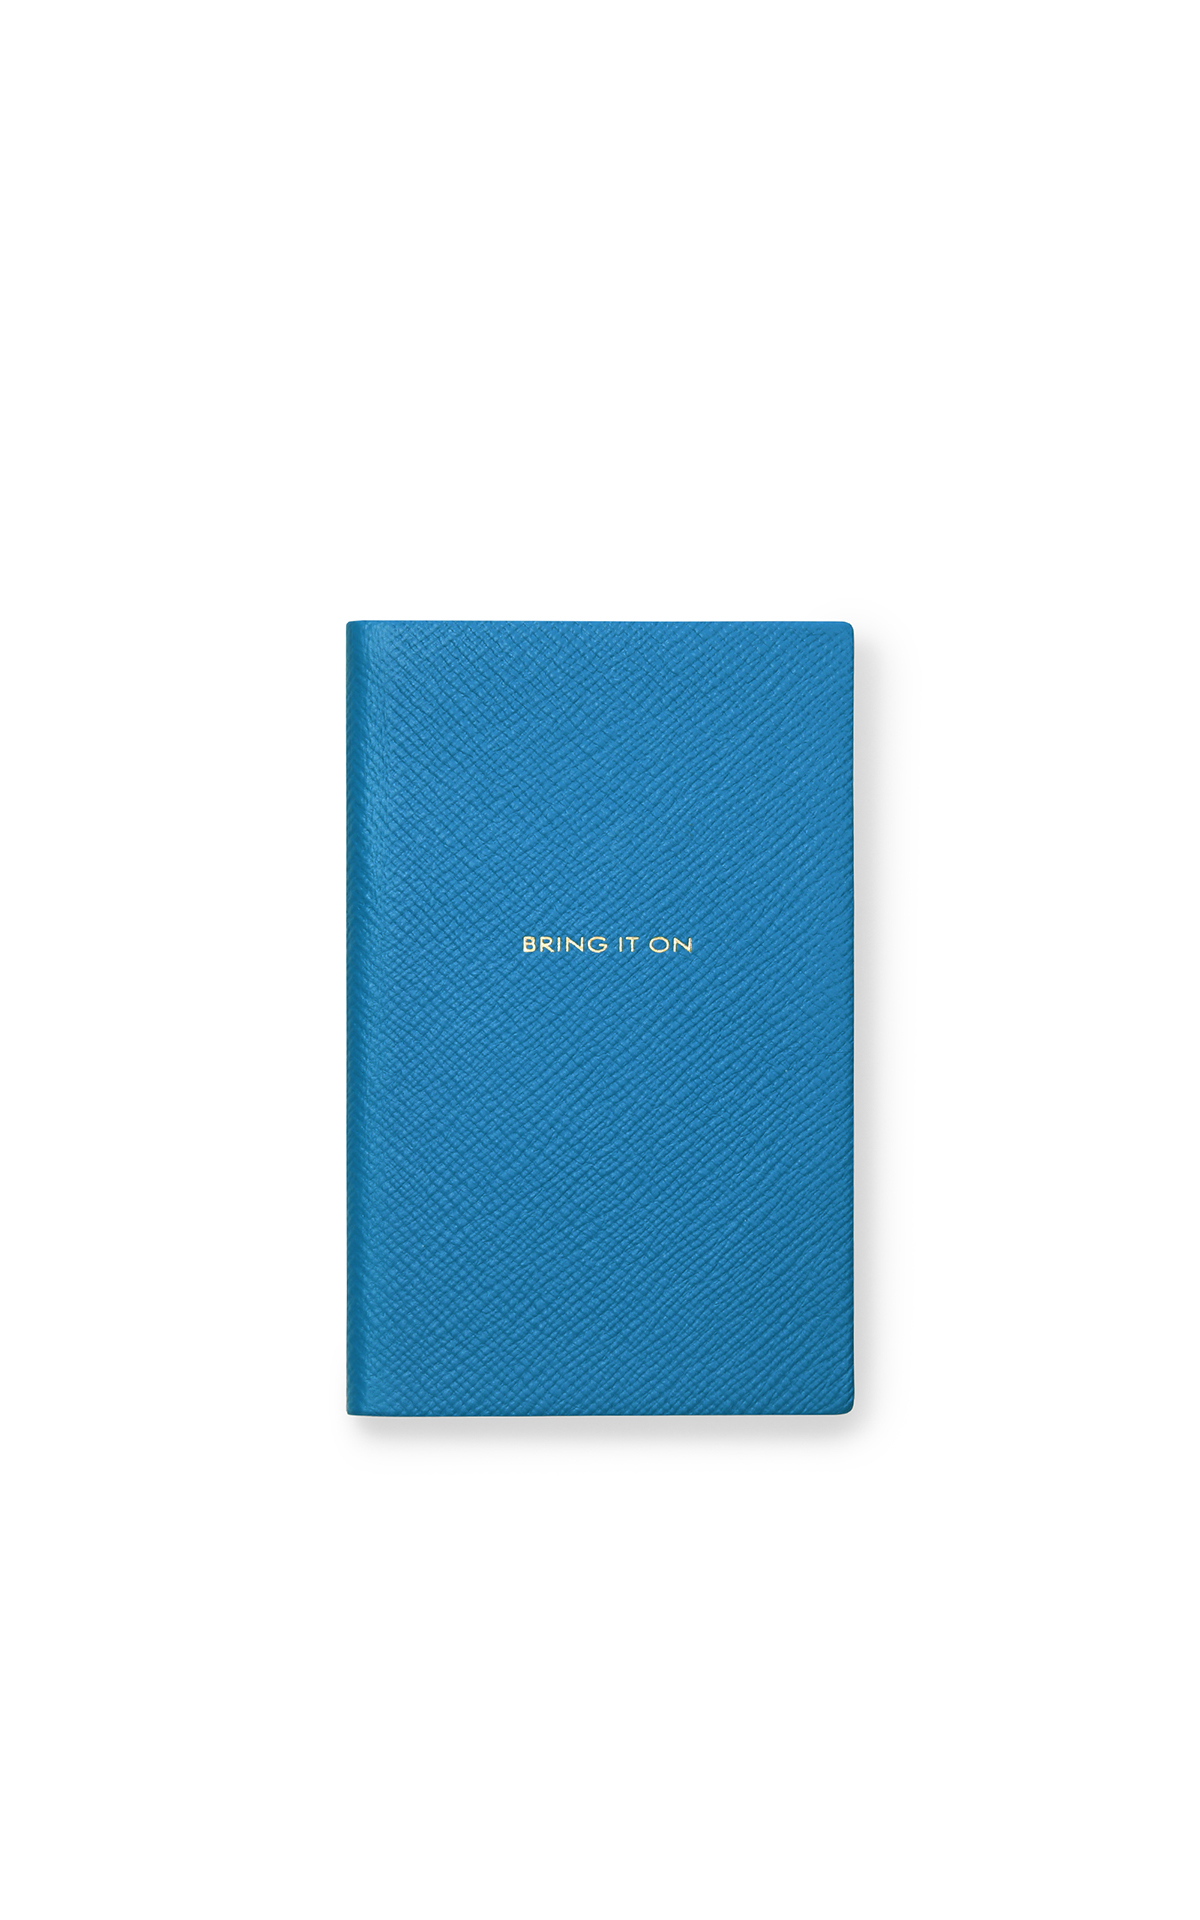 Smythson Panama bring it on notebook azure from Bicester Village